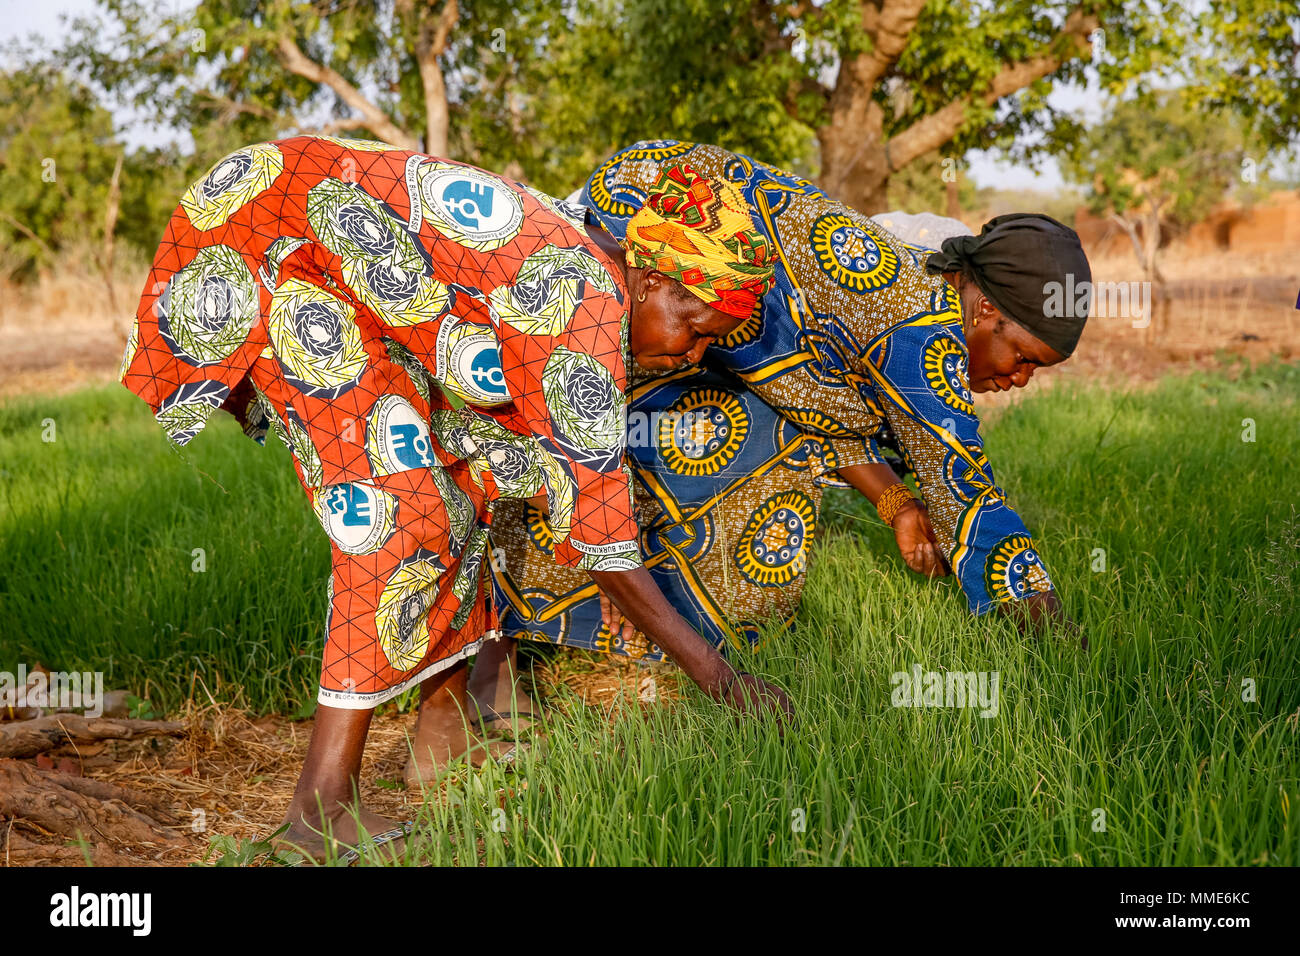 UBTEC NGO in a village near Ouahigouya, Burkina Faso. Members of a cooperative at work in a vegetable garden. Stock Photo